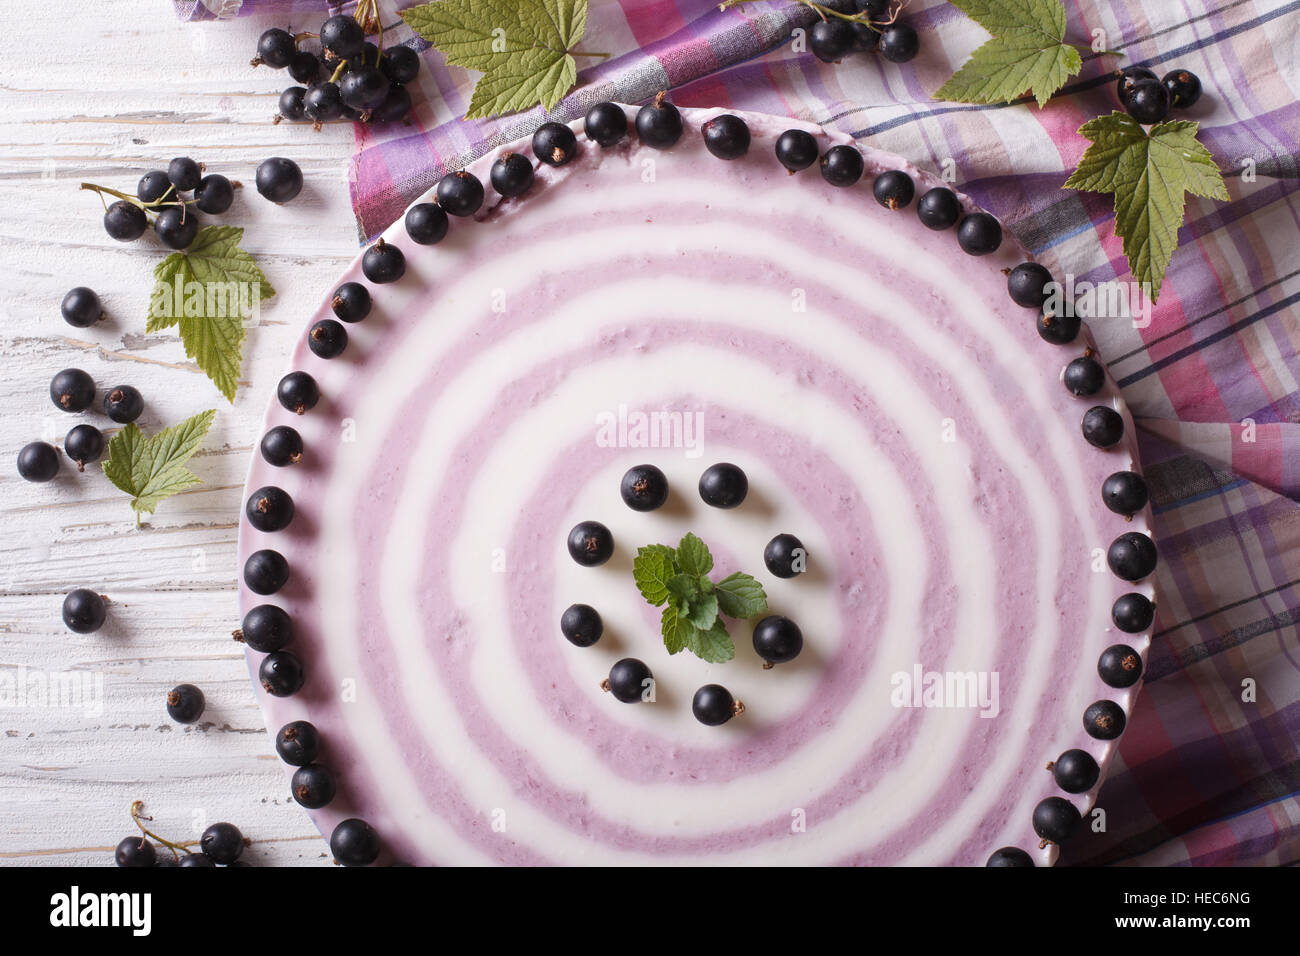 Delicious cheesecake striped black currant close up on the table. horizontal top view Stock Photo